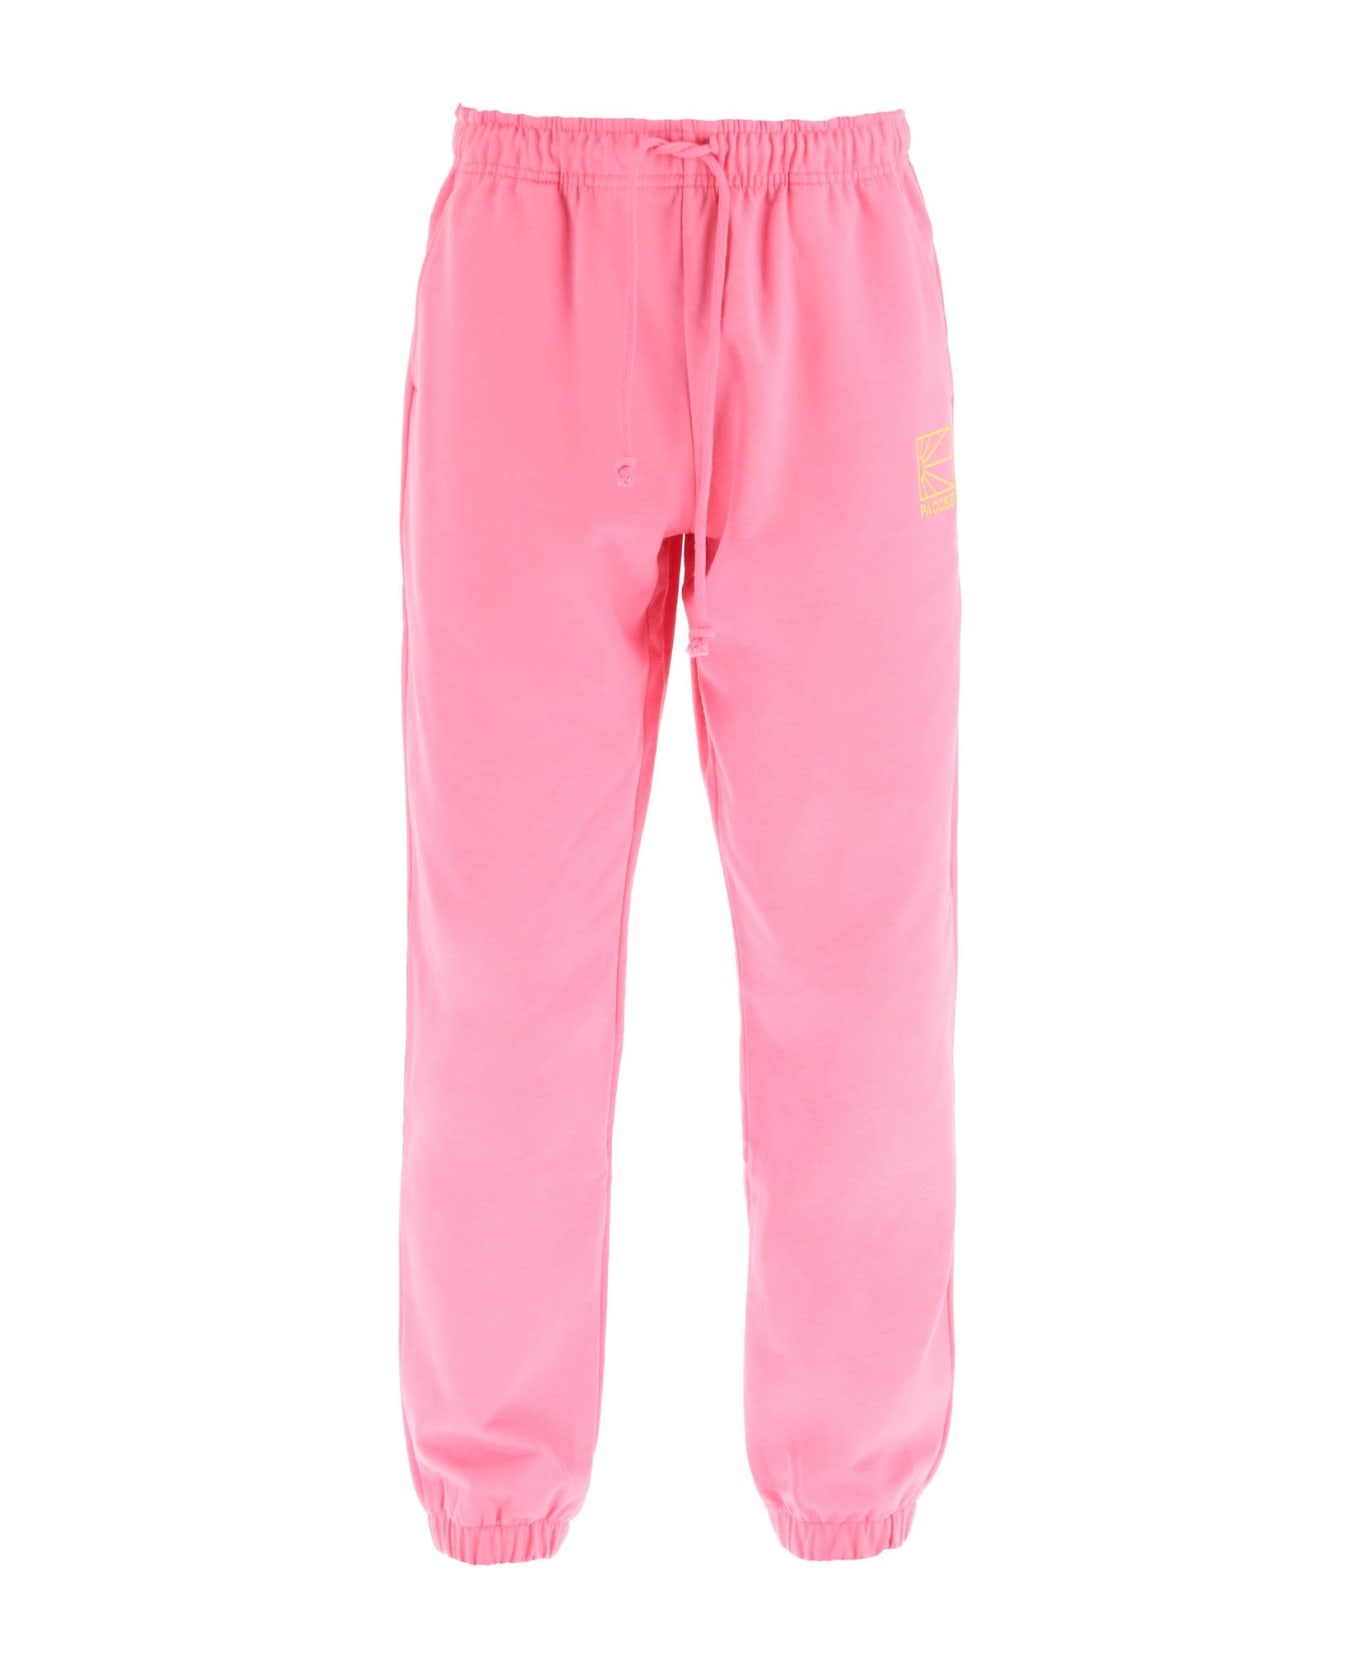 PACCBET Logo Embroidery Jogger Pants - PINK 4 (Pink) スウェットパンツ